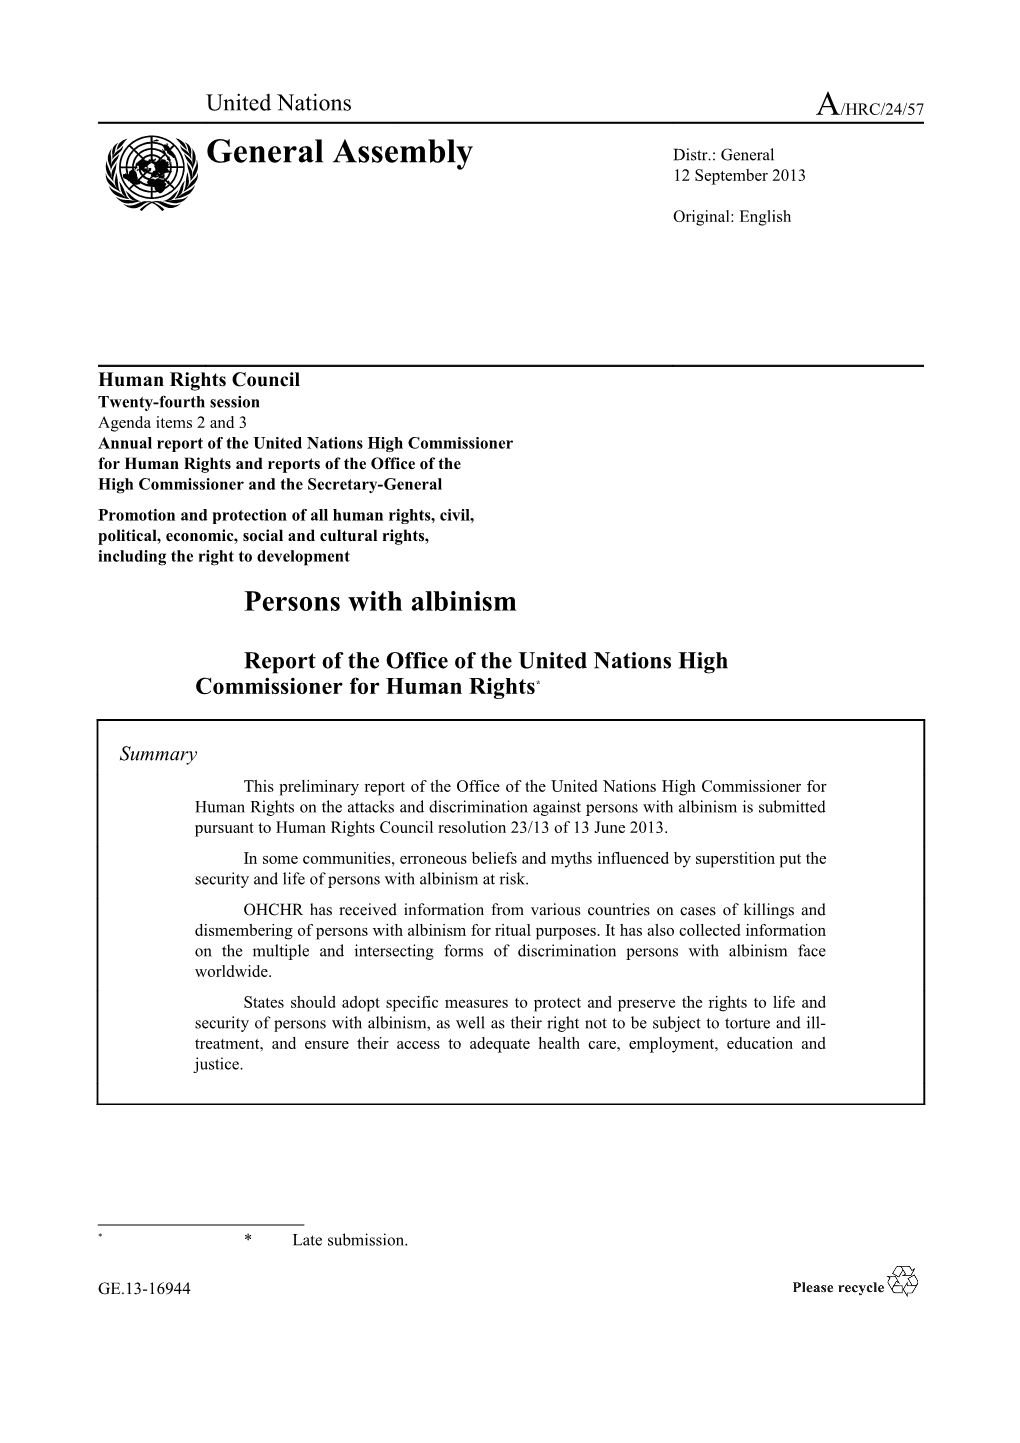 Persons with Albinism - Report of the Office of the United Nations High Commissioner For